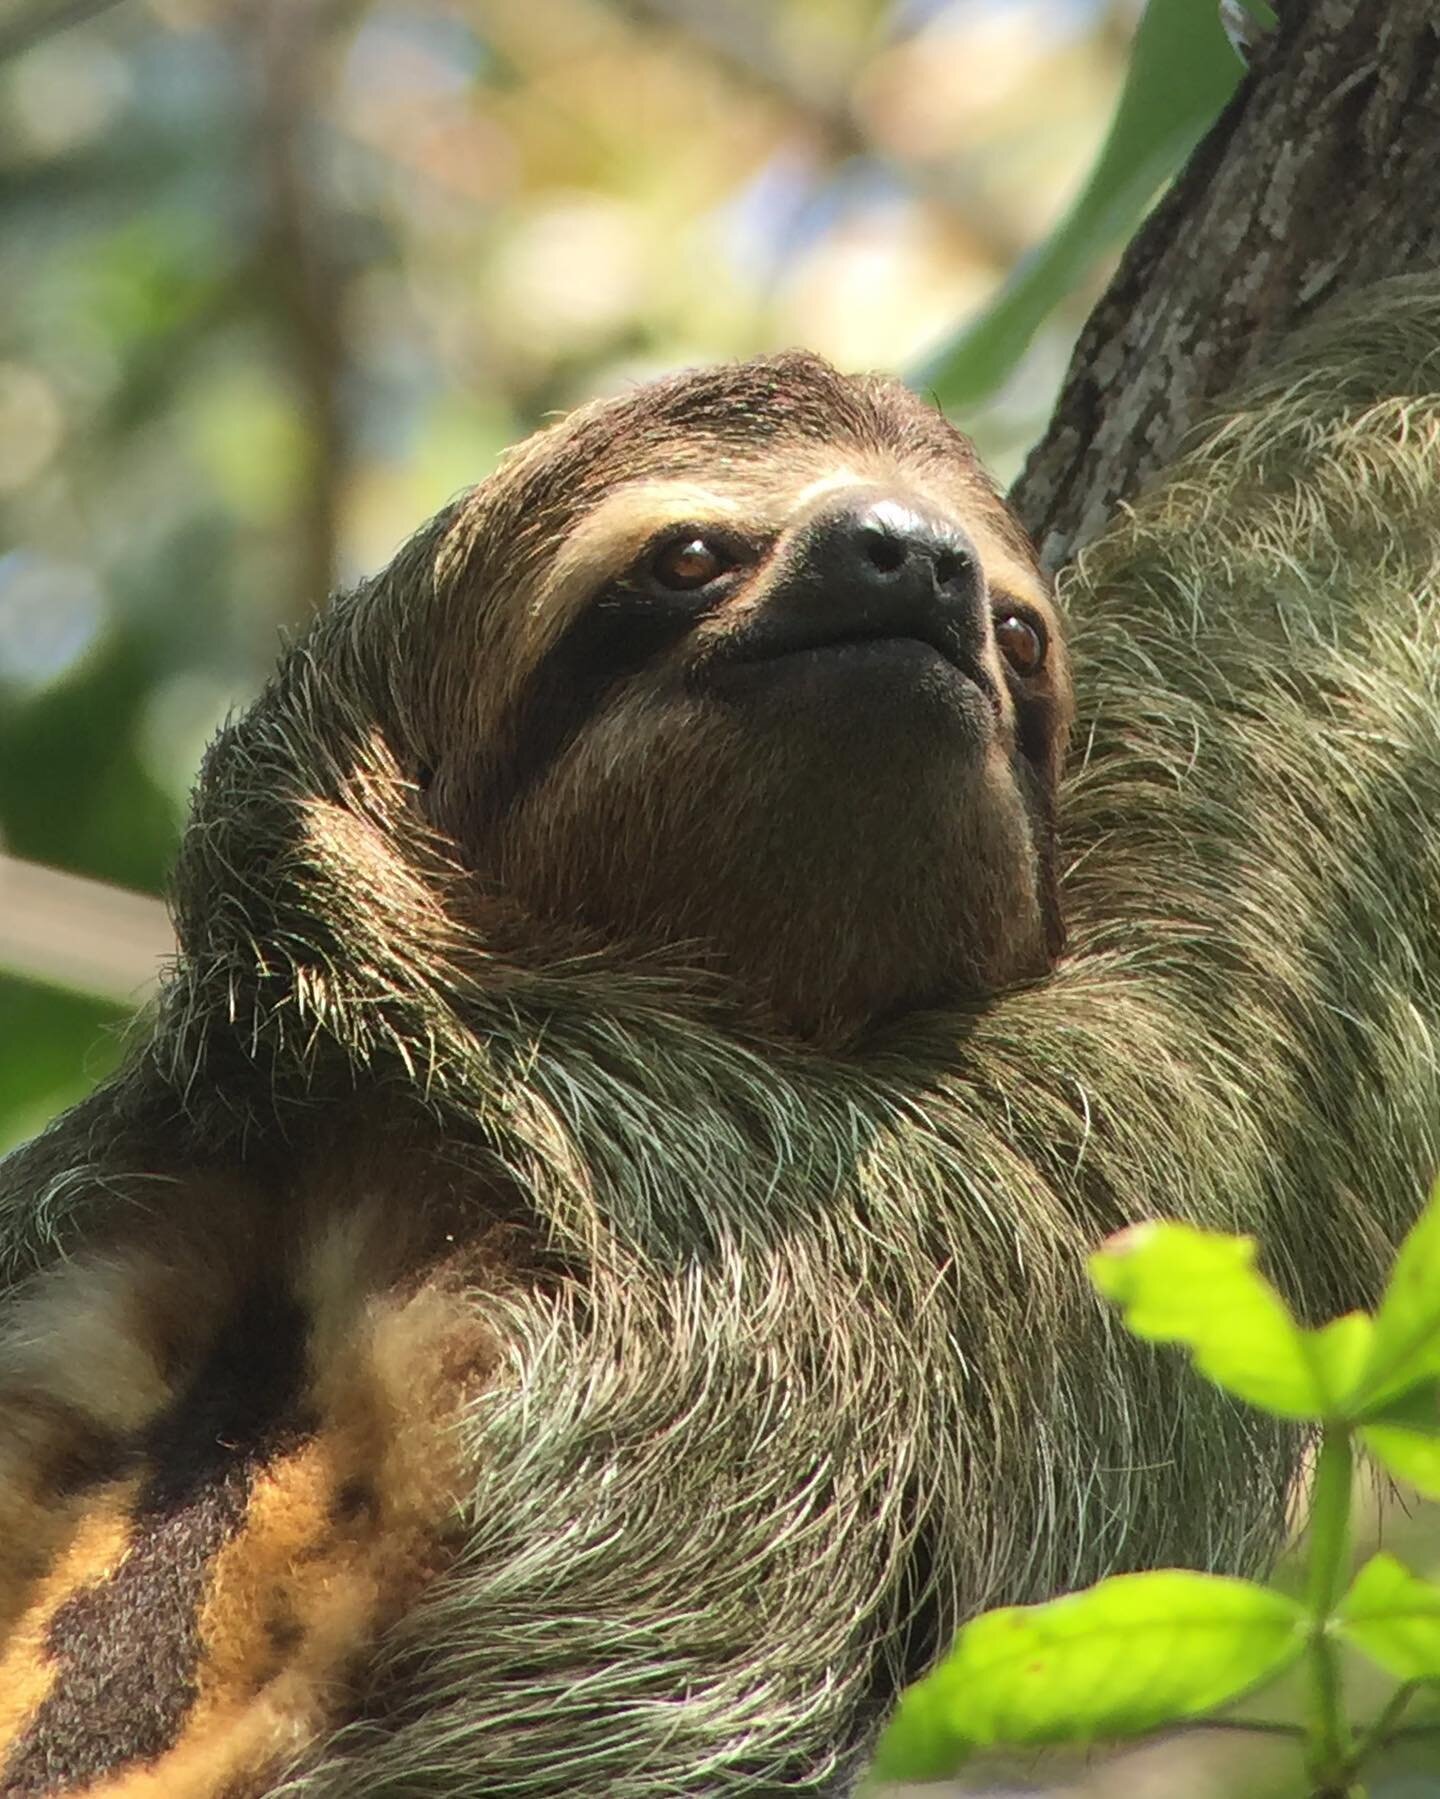 Throwback to when I snapped these pics of a three-toed sloth in Manuel Antonio, Costa Rica. What&rsquo;s kinda wild is the picture was taken by holding my iPhone&rsquo;s camera up to the eye hole of a digiscope! 

Pretty sure my patronus would be a s